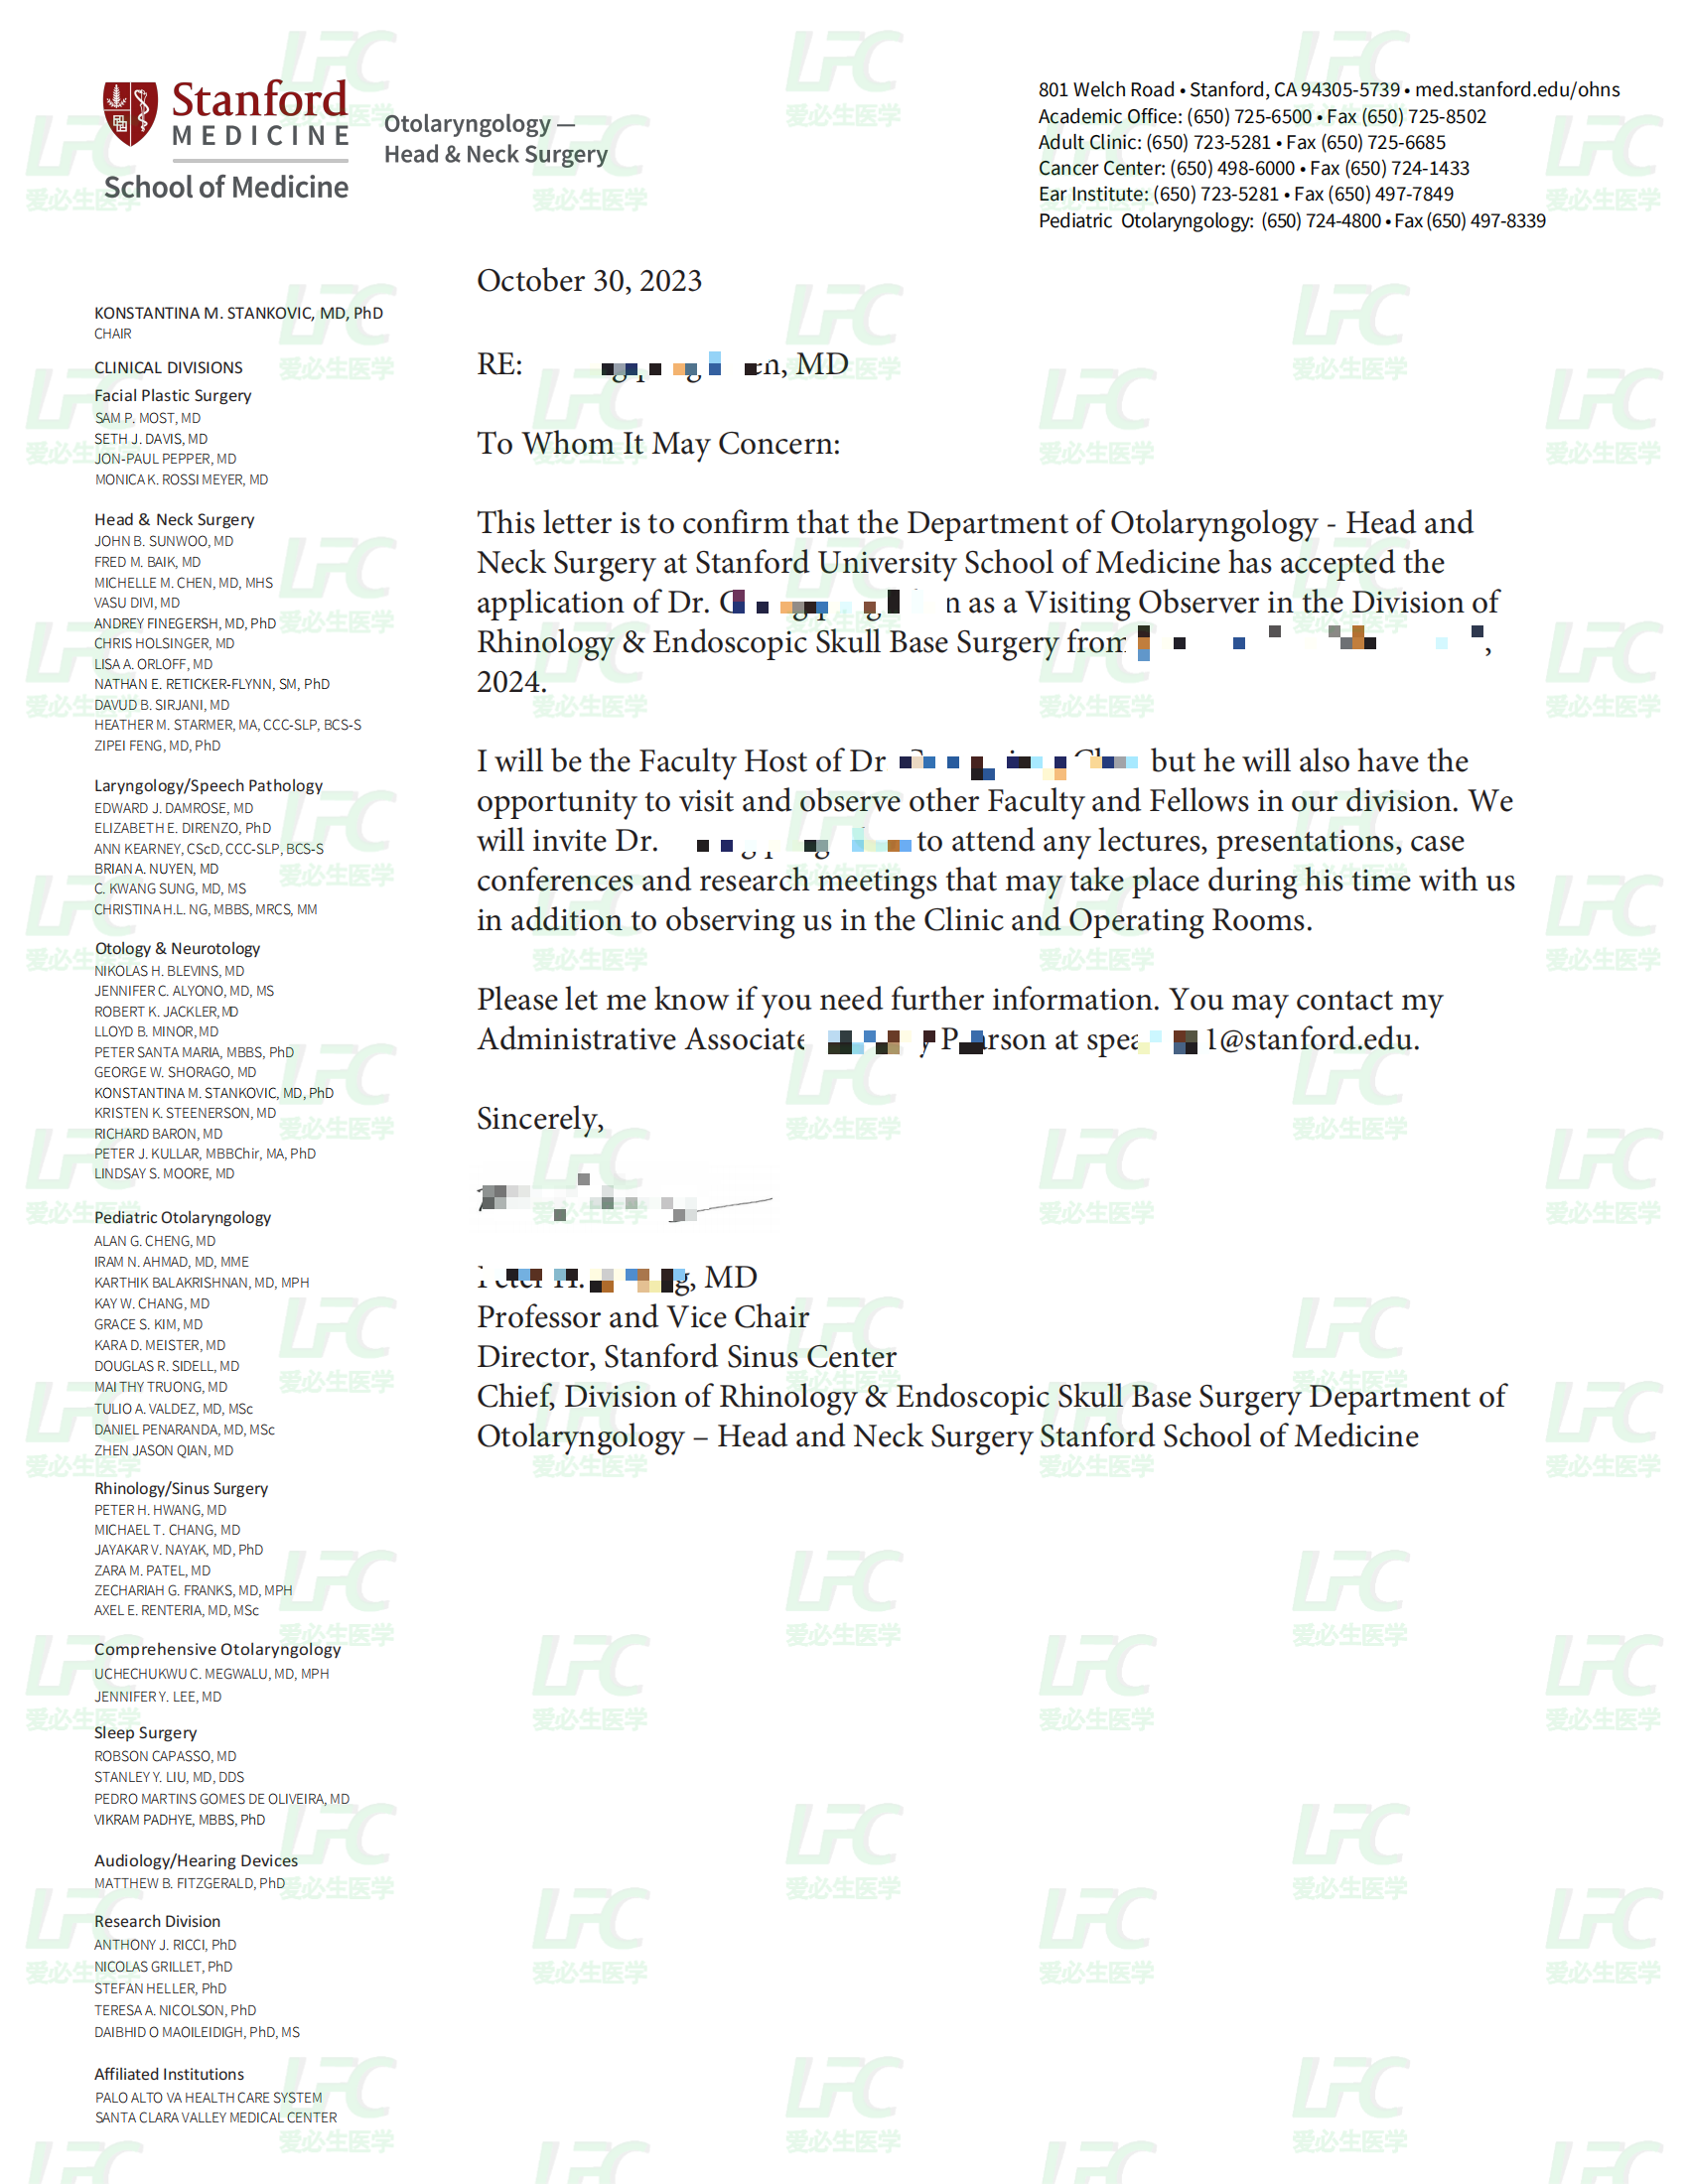 Visiting Observer Confirmation Letter Dr. Guangqiang Chen_00.png